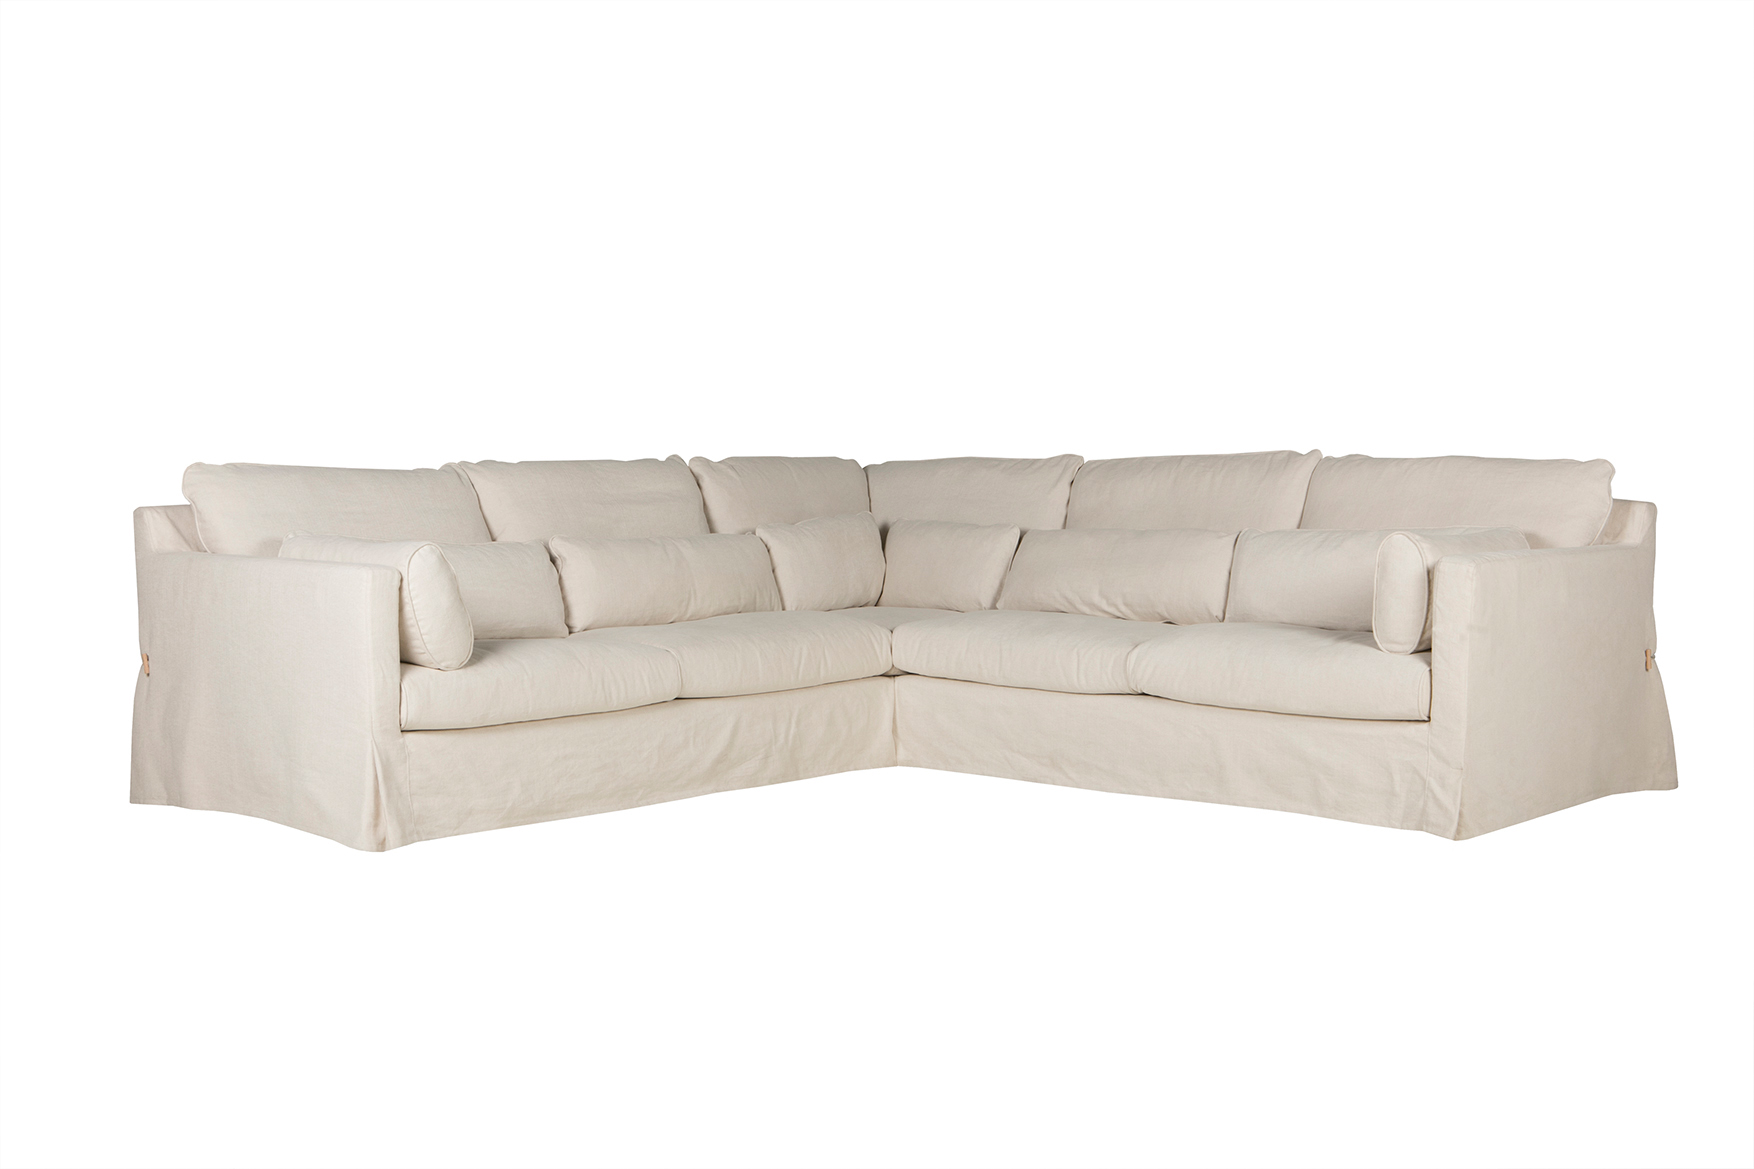 Sara 4 seater with left or right divan